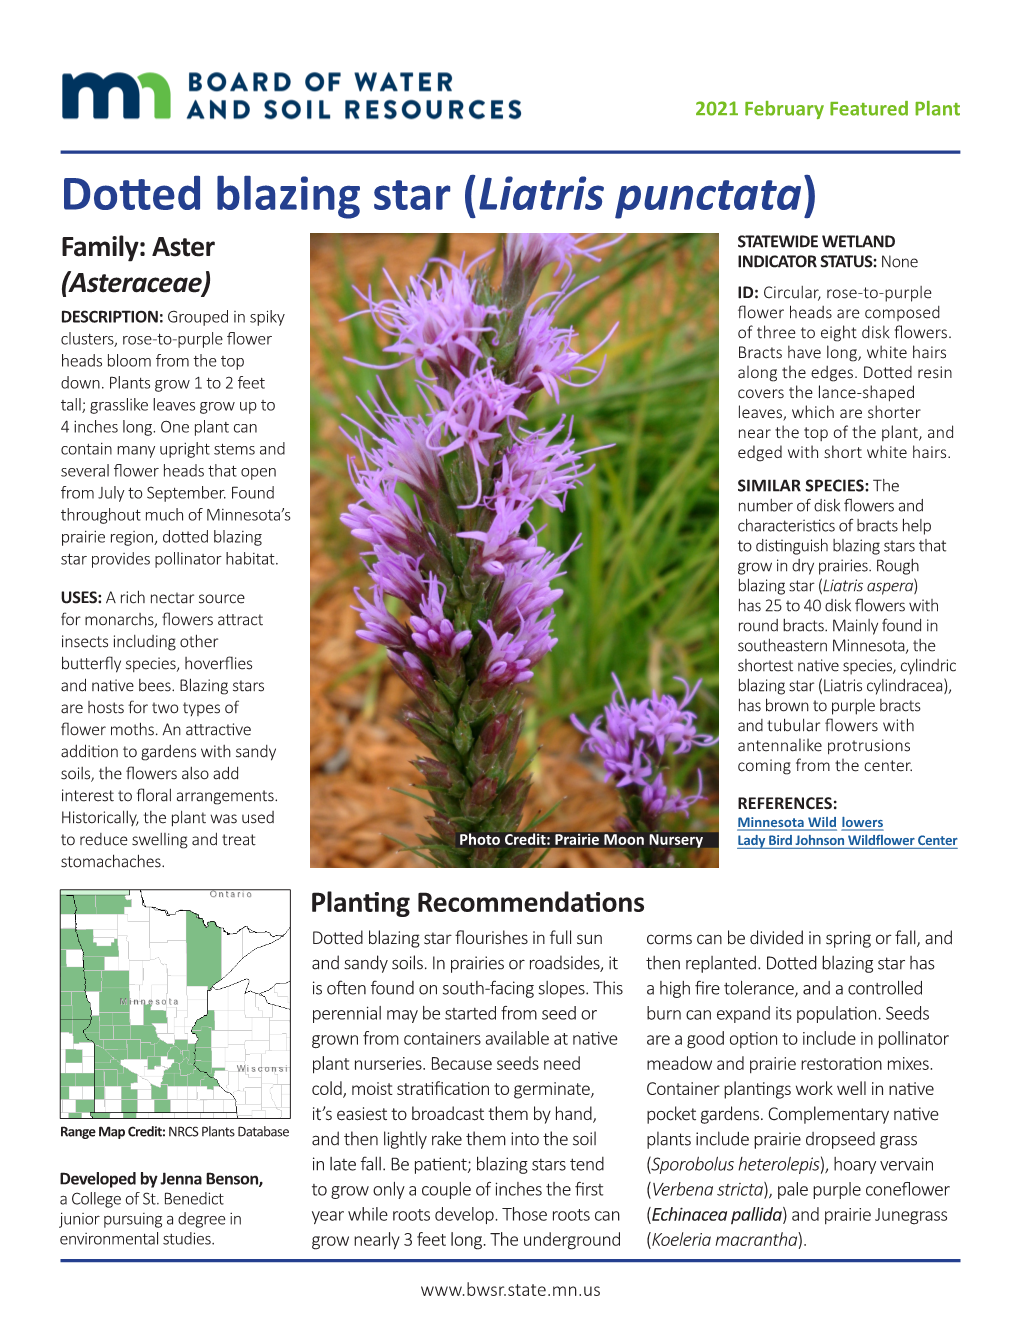 2021 February Featured Plant: Dotted Blazing Star